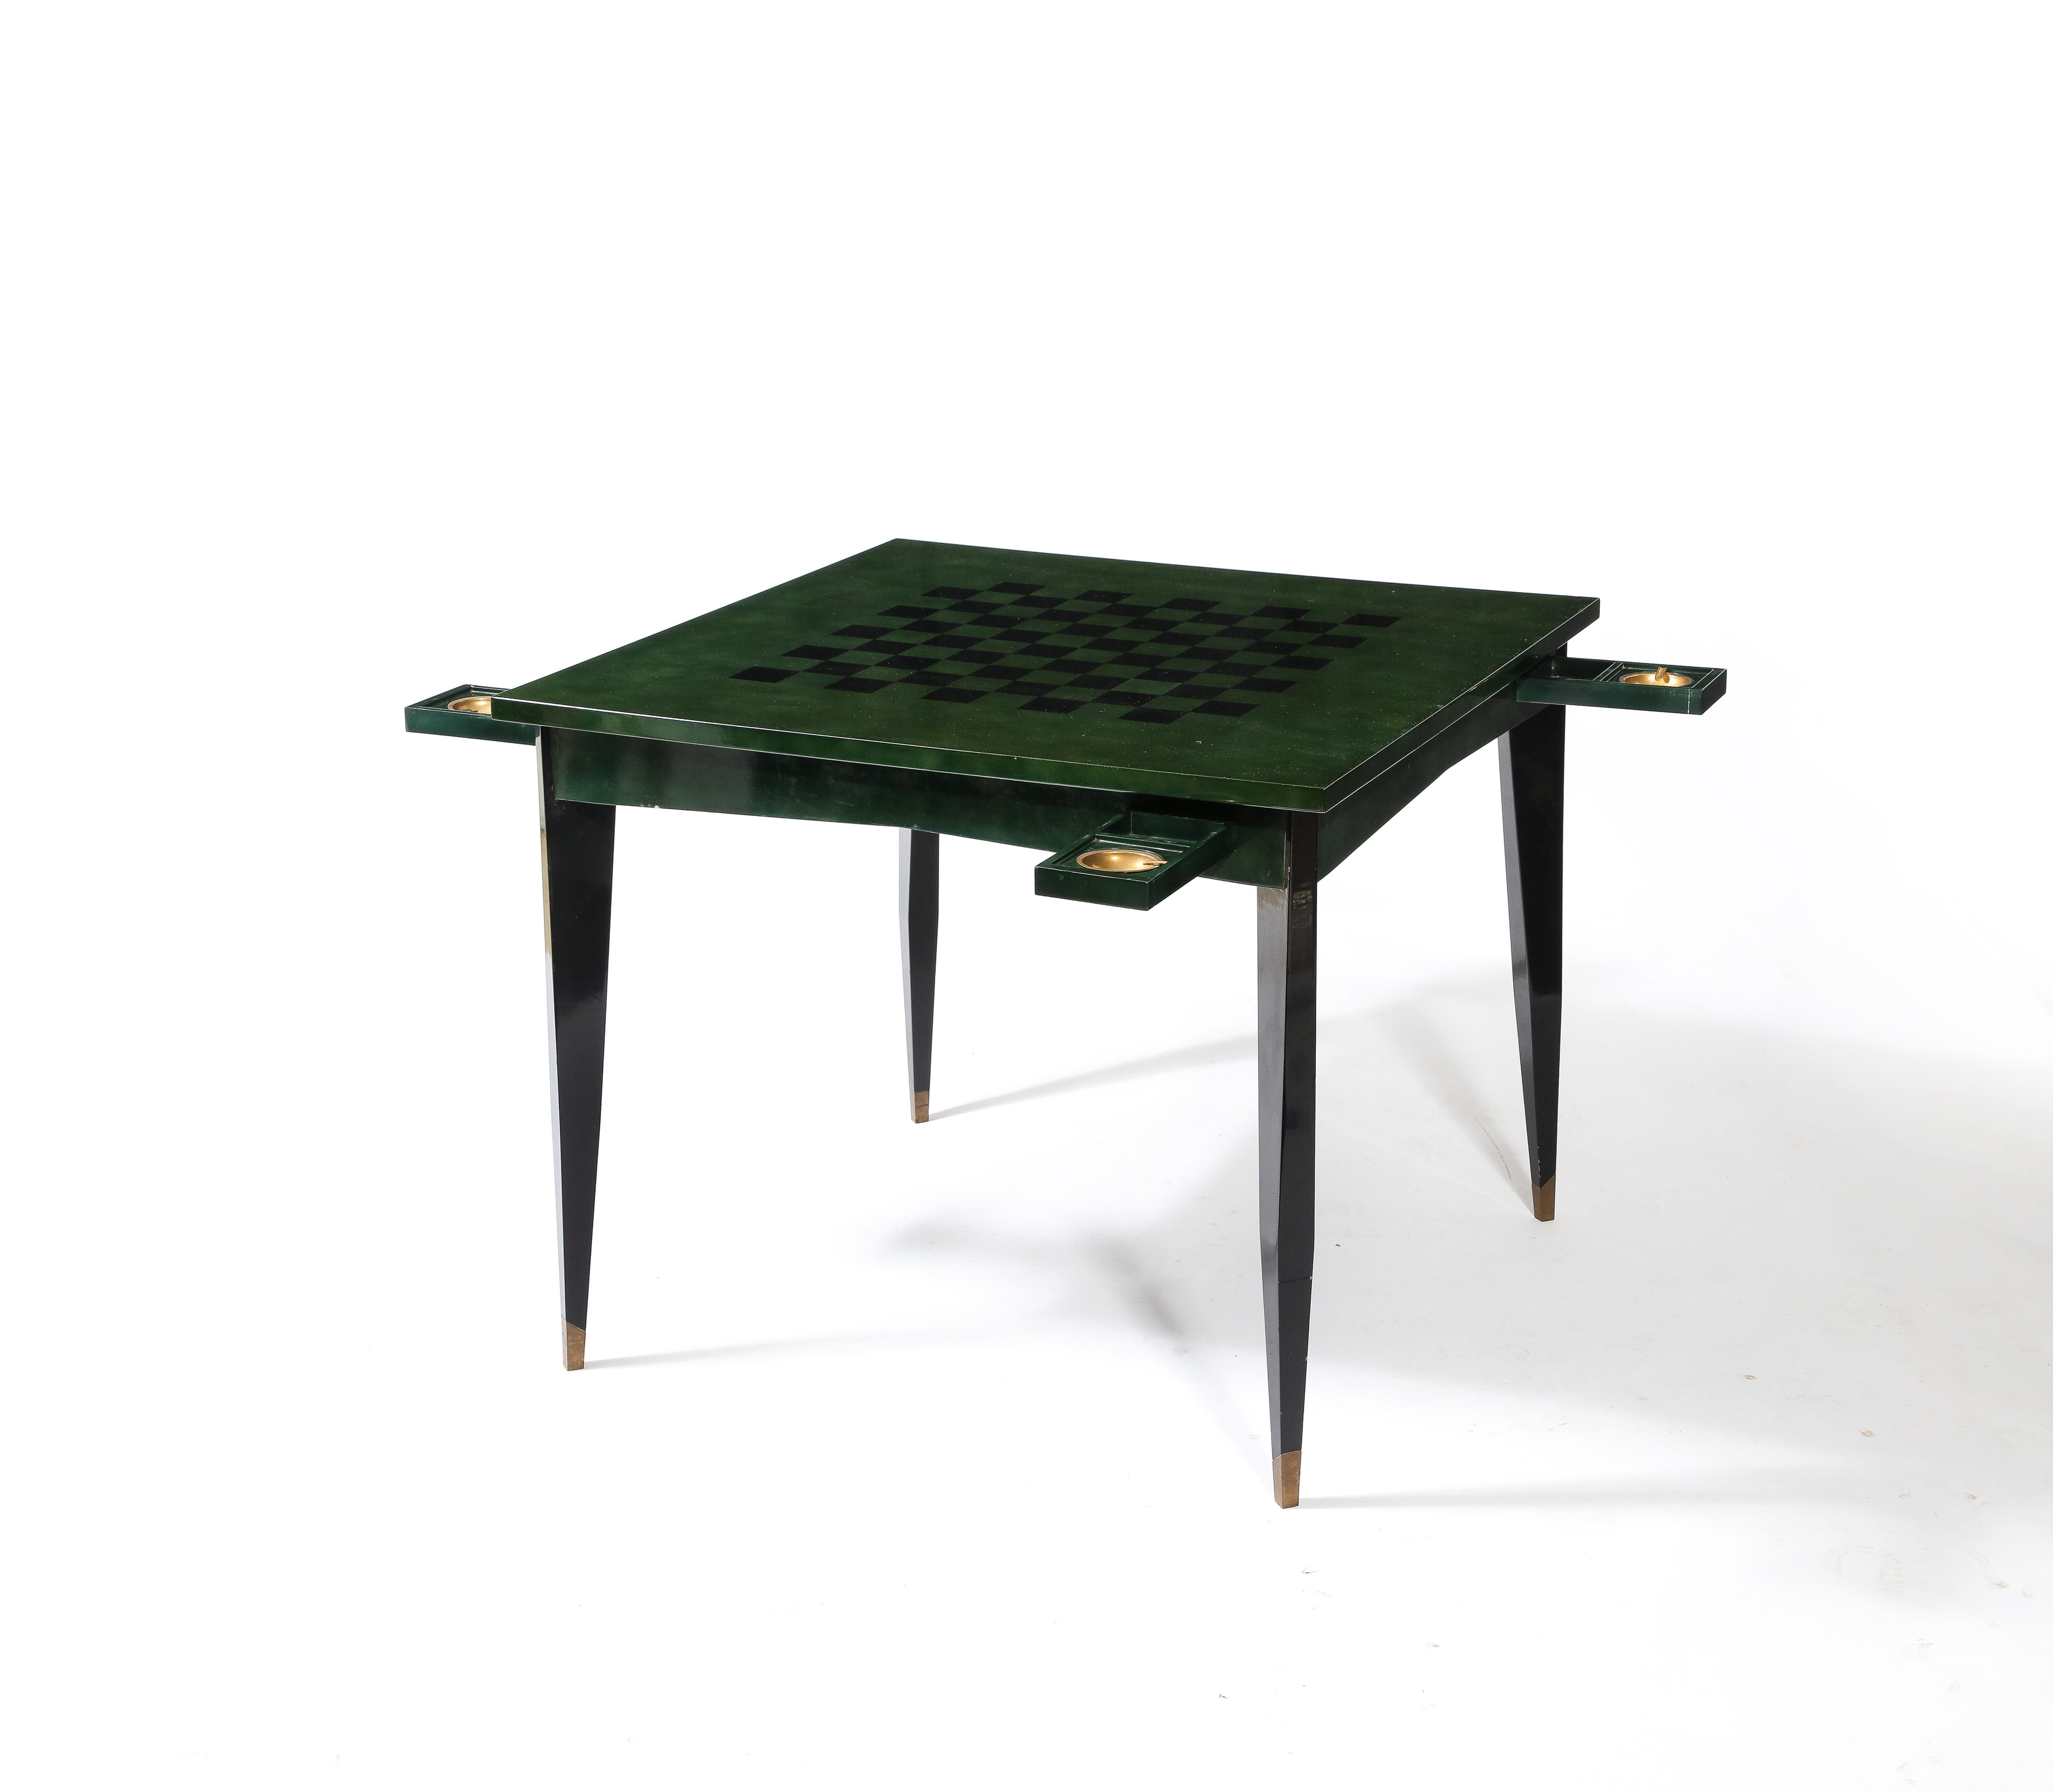 20th Century Raphael Raffel Game Table in Green & Black Beka Lacquer, France 1950's For Sale